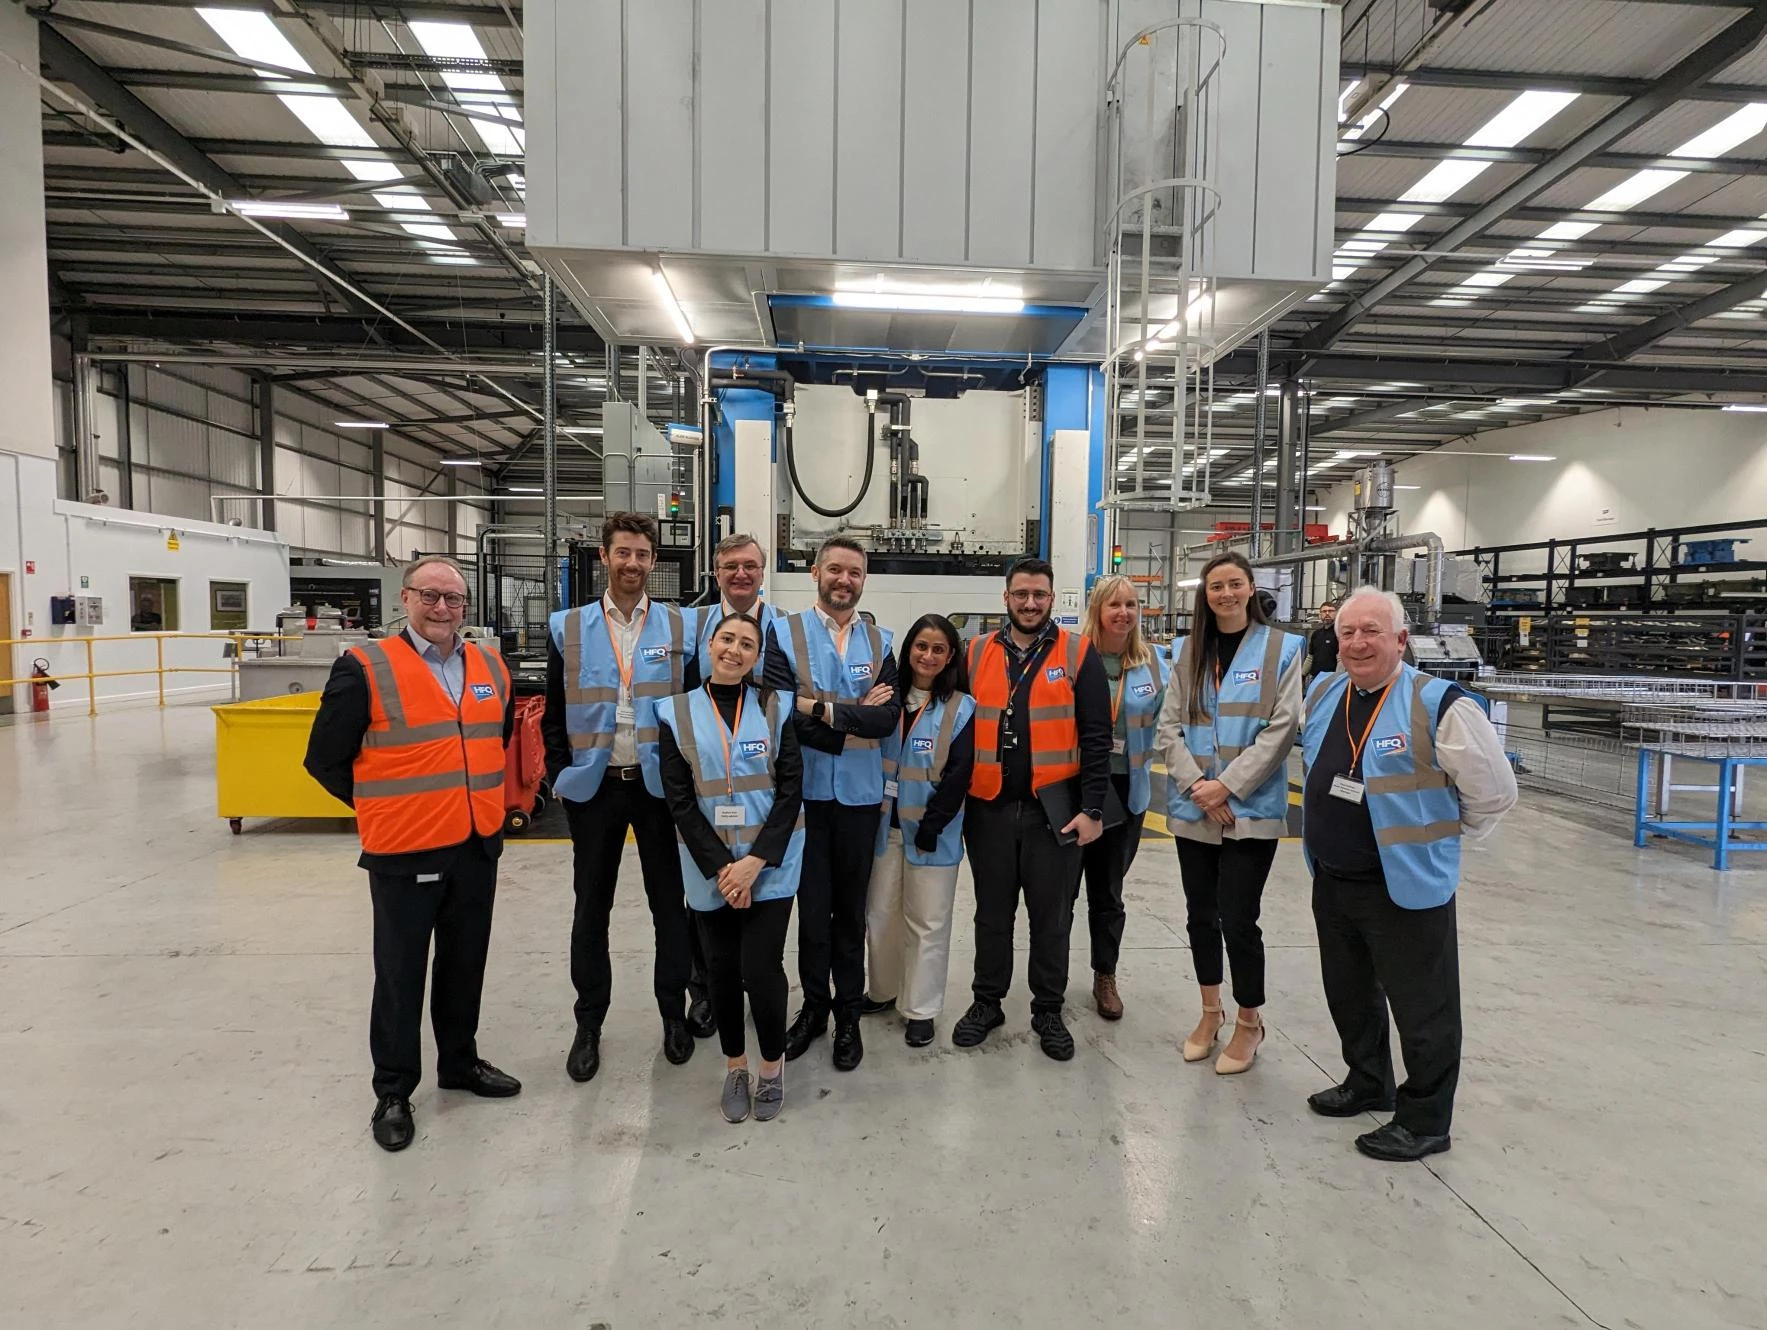 Officials from the Department for Business and Trade with representatives from Made Smarter West Midlands and Impression Technologies during their visit to Coventry